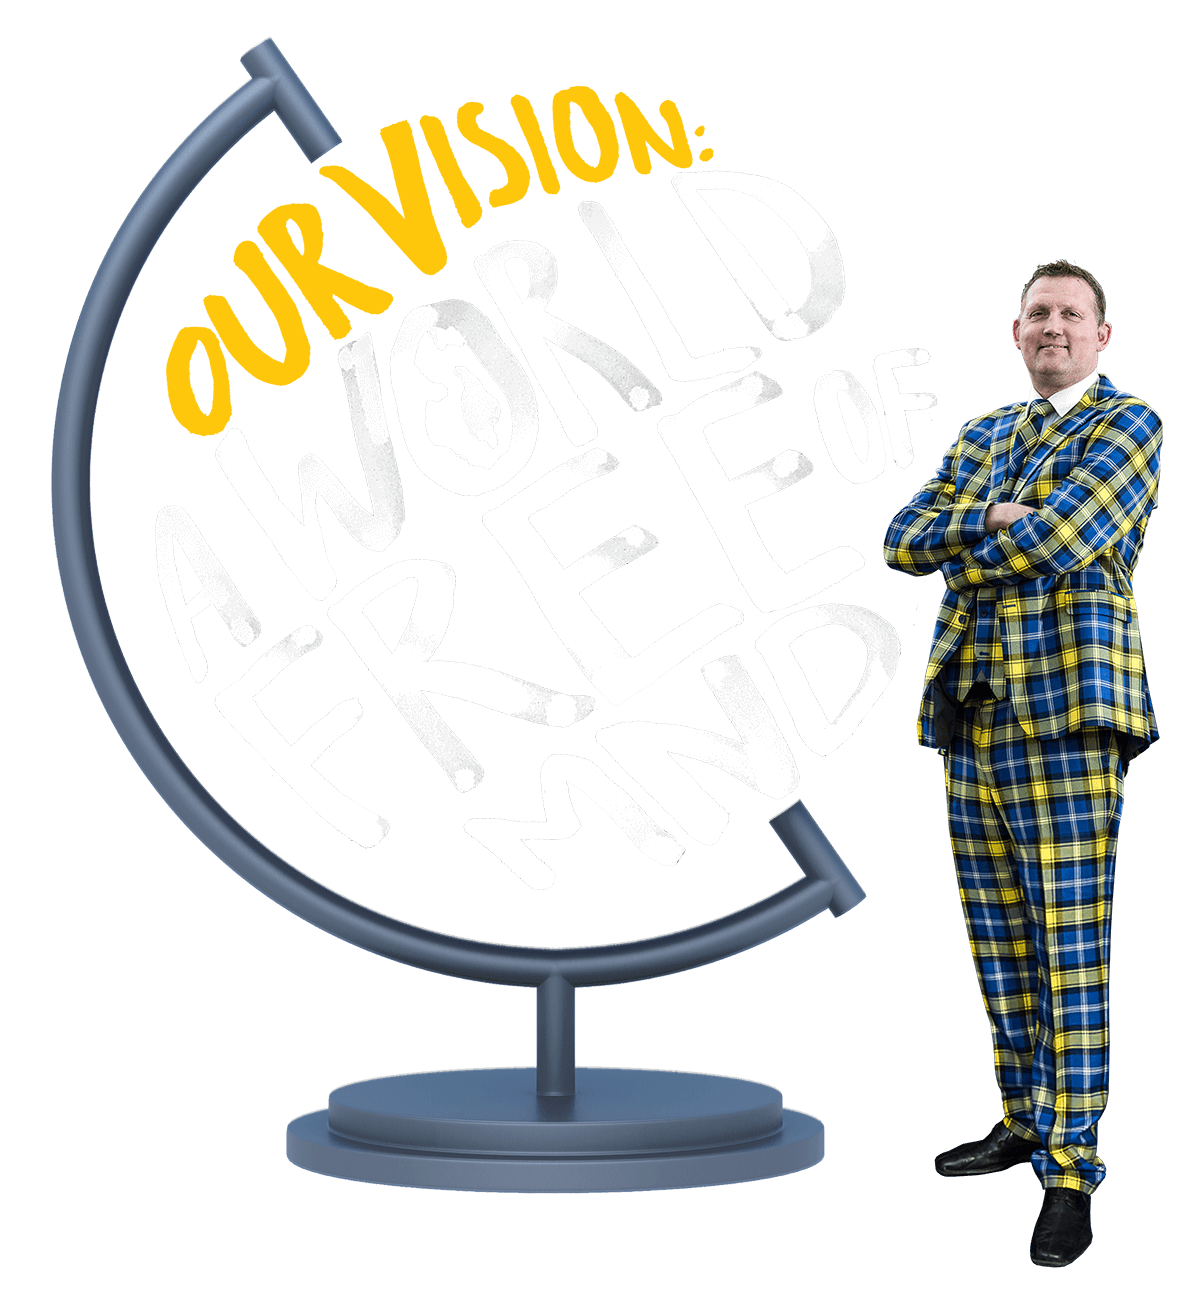 Our vision - a world free of MND